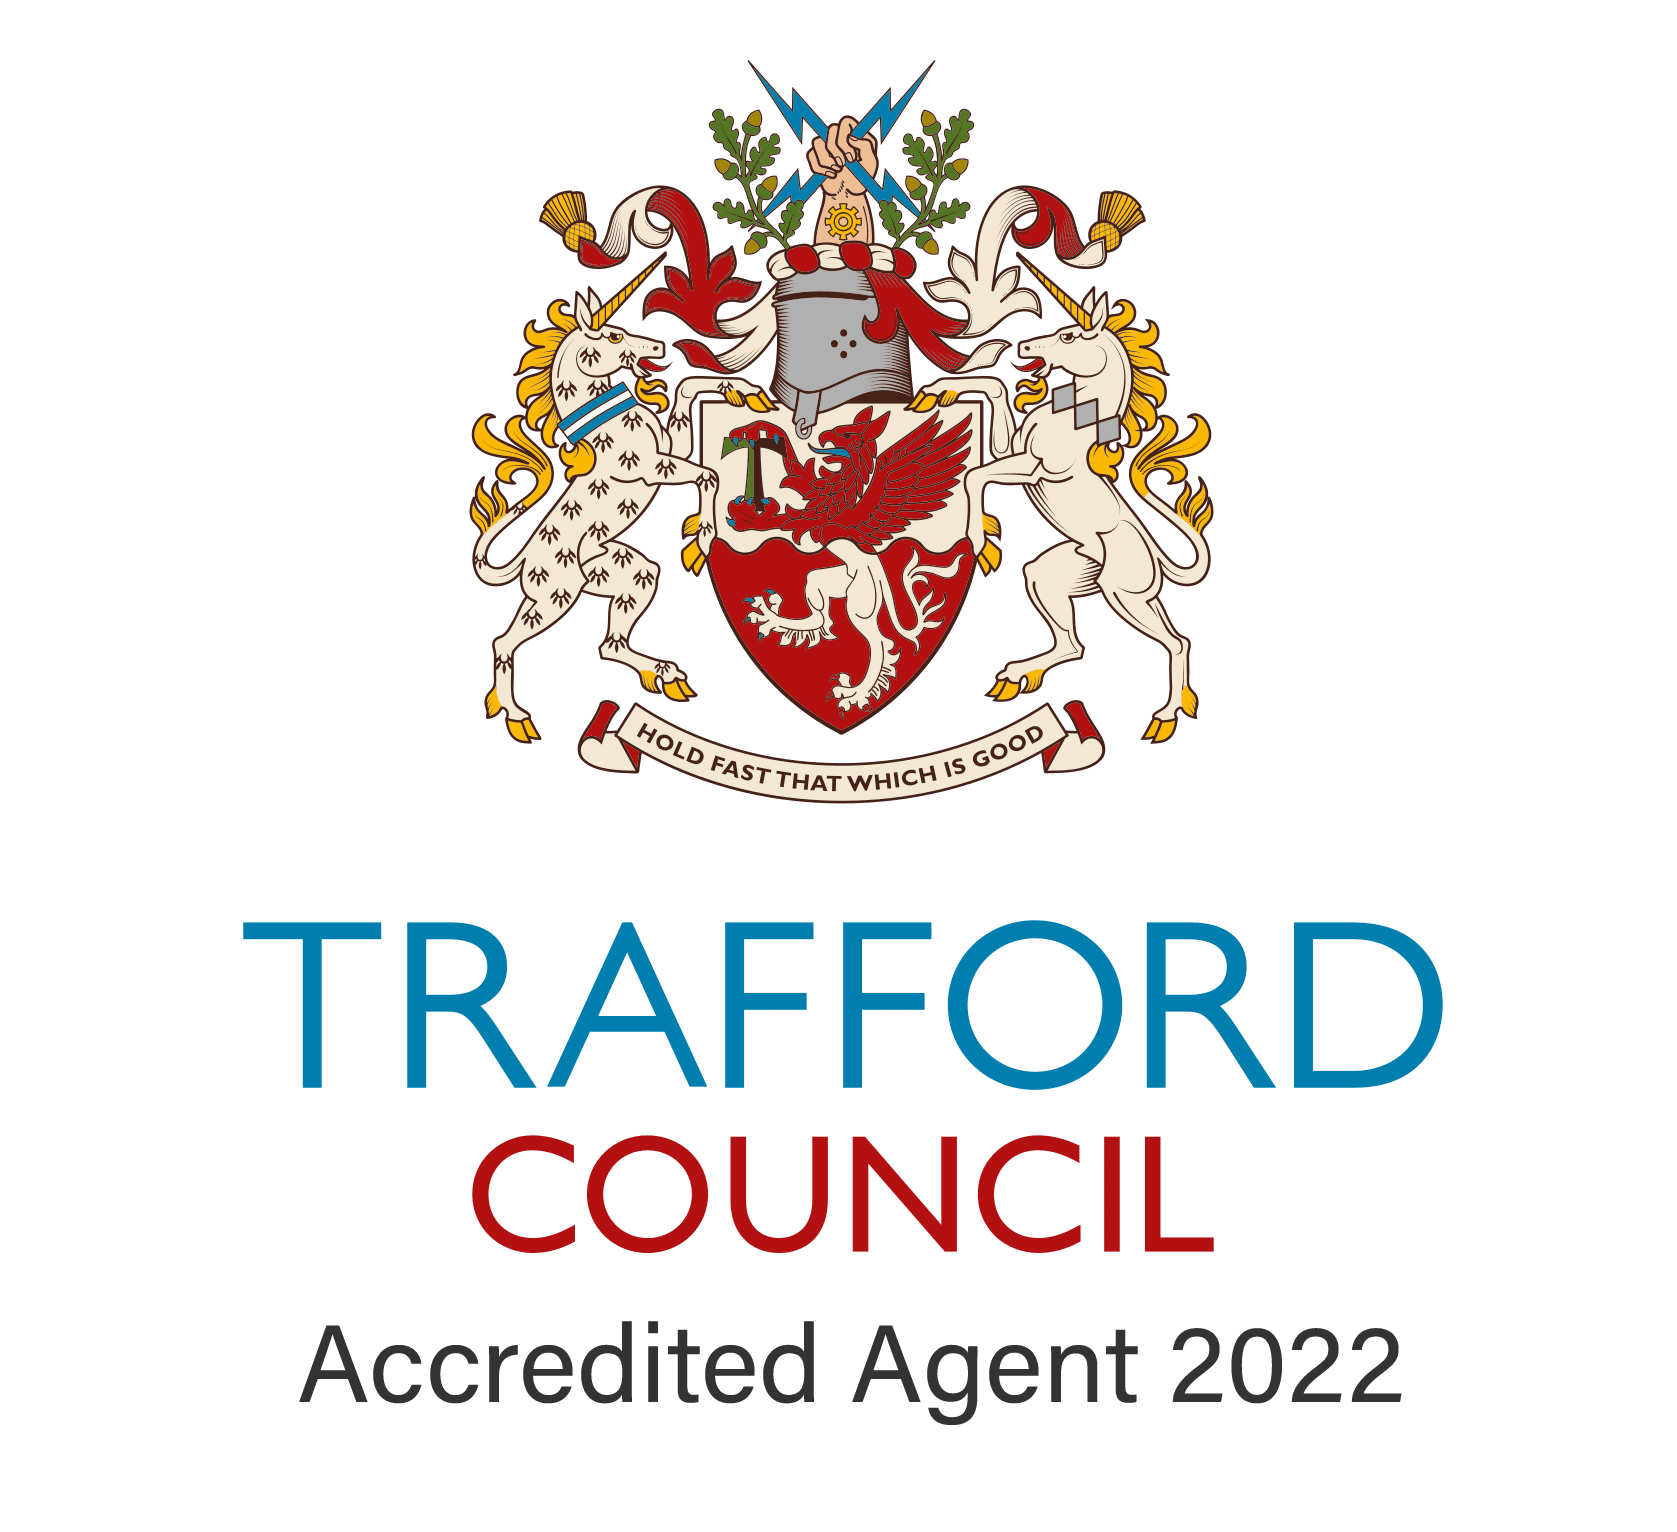 a logo with trafford council accredited agent 2022